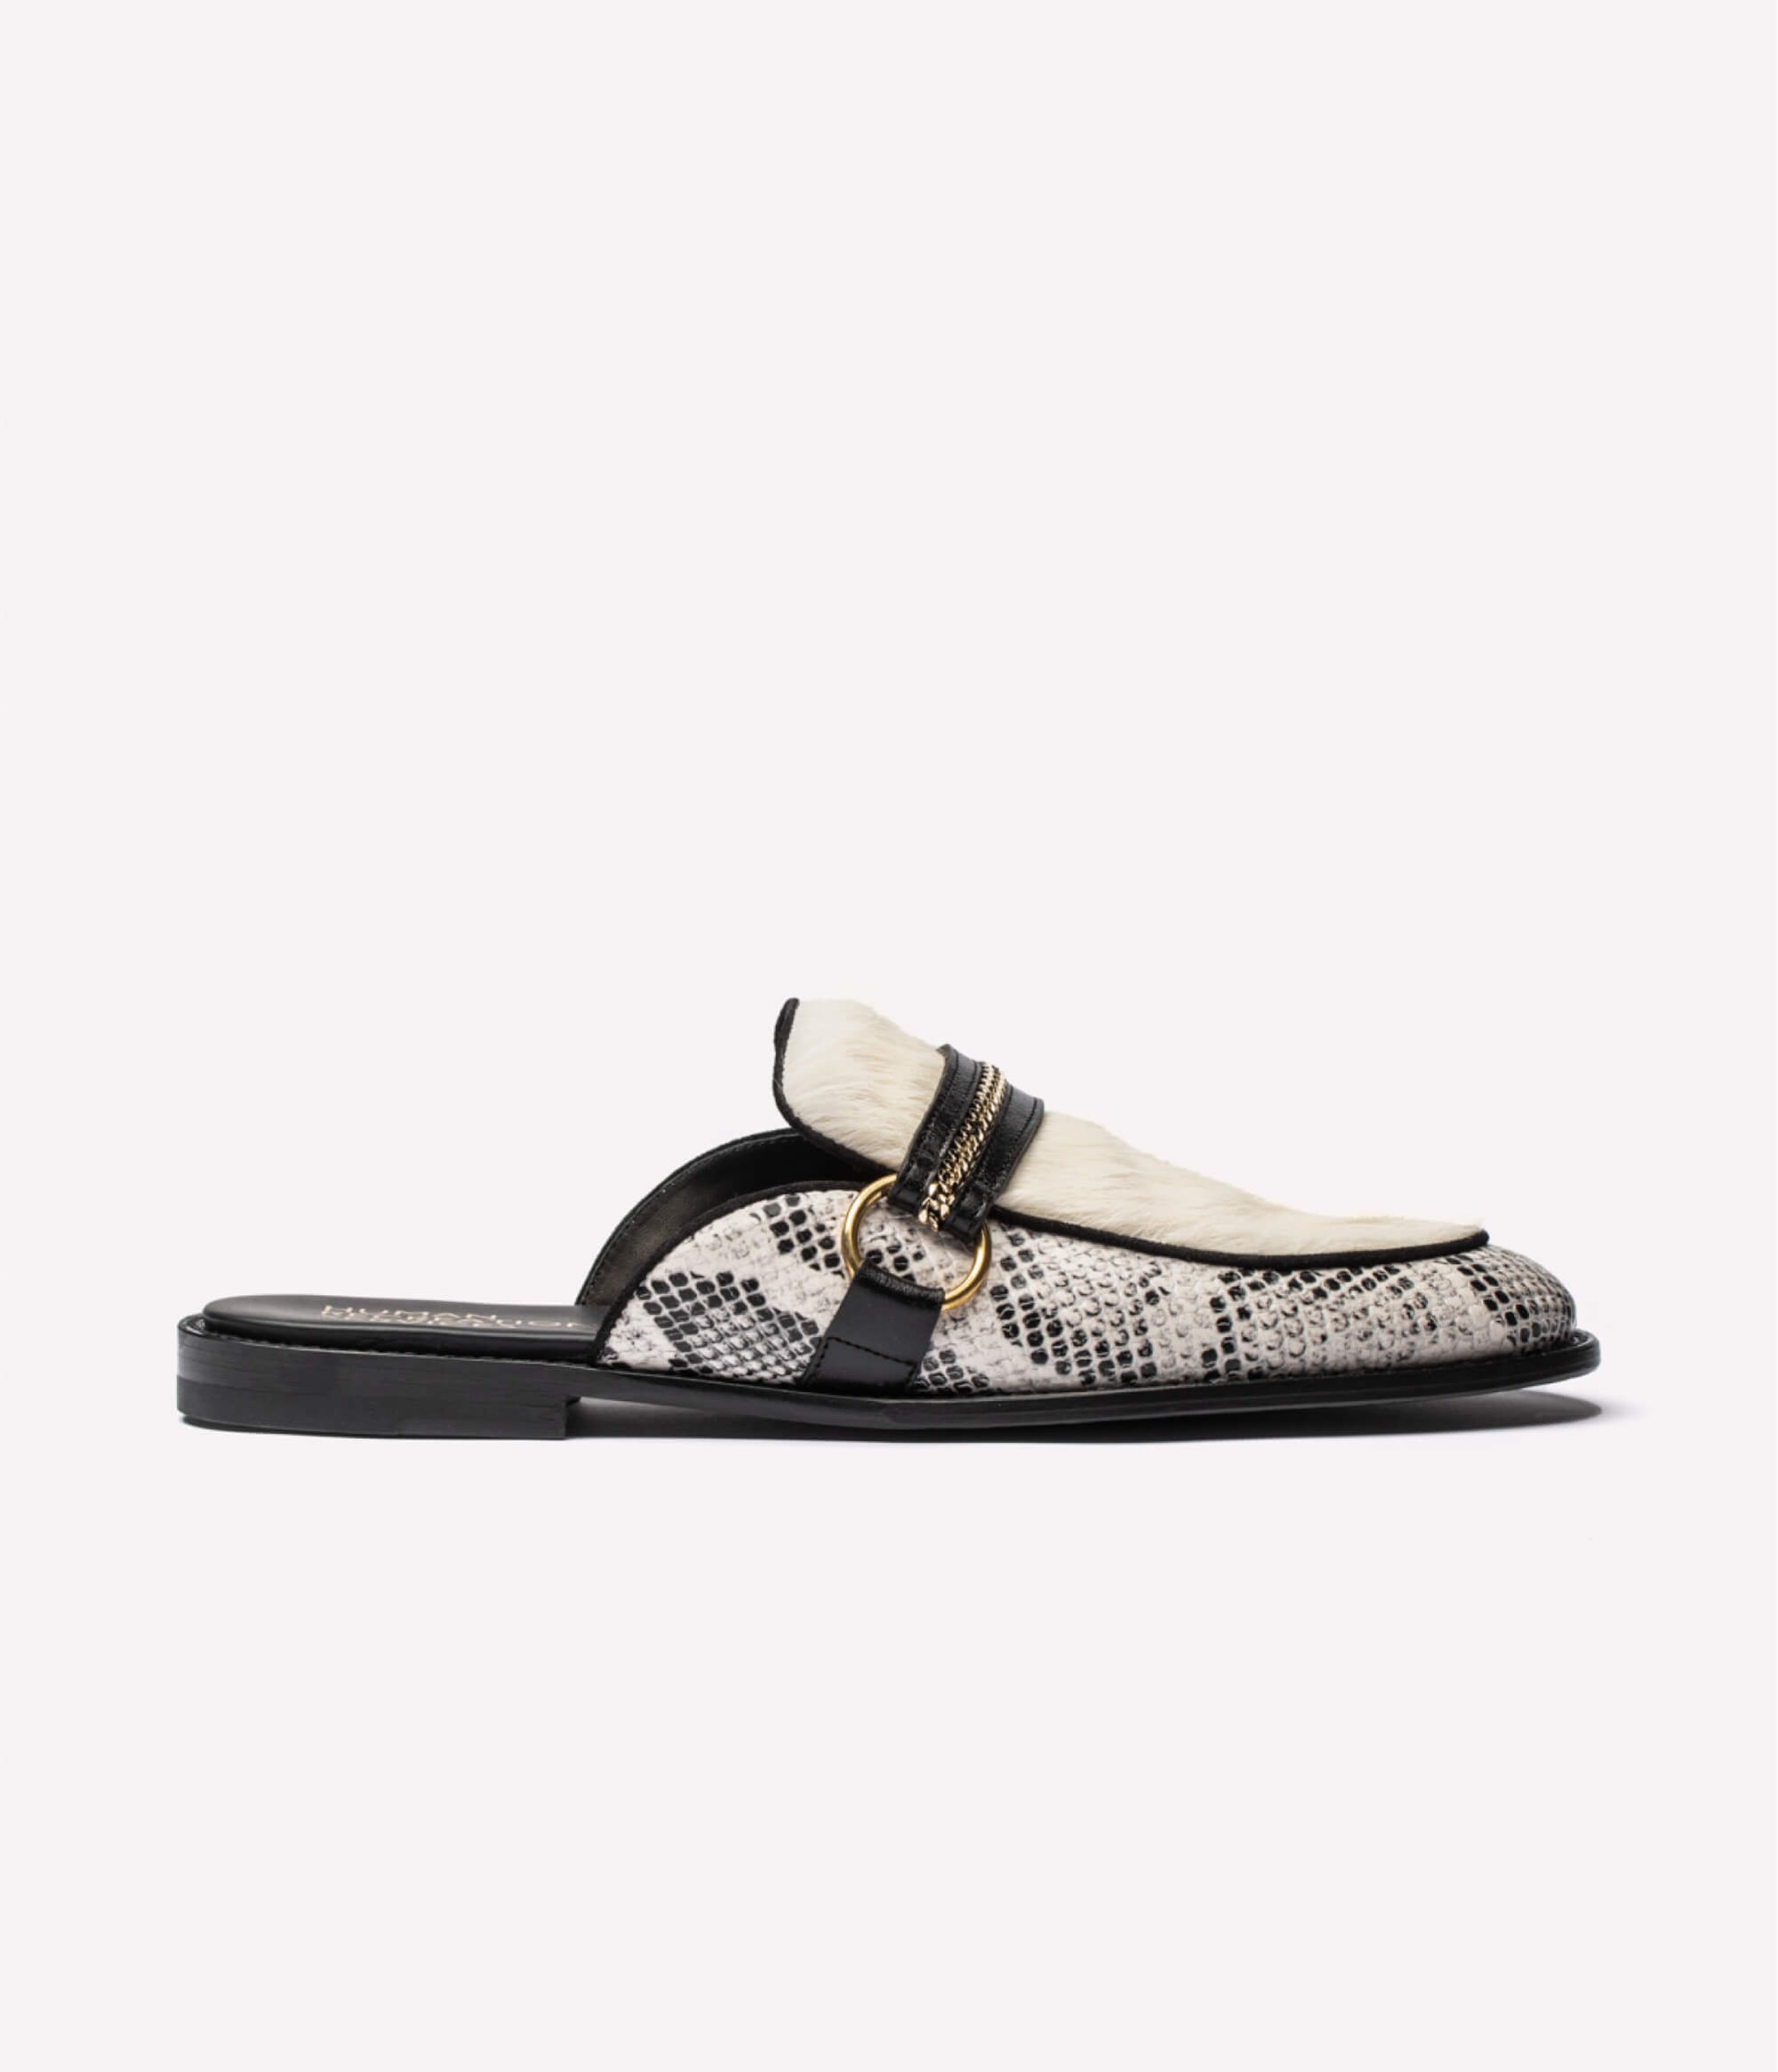 HUMAN RECREATIONAL SERVICES PALAZZO SLIPPER IN WHITE SNAKE MADE WITH ITALIAN CALF SKIN